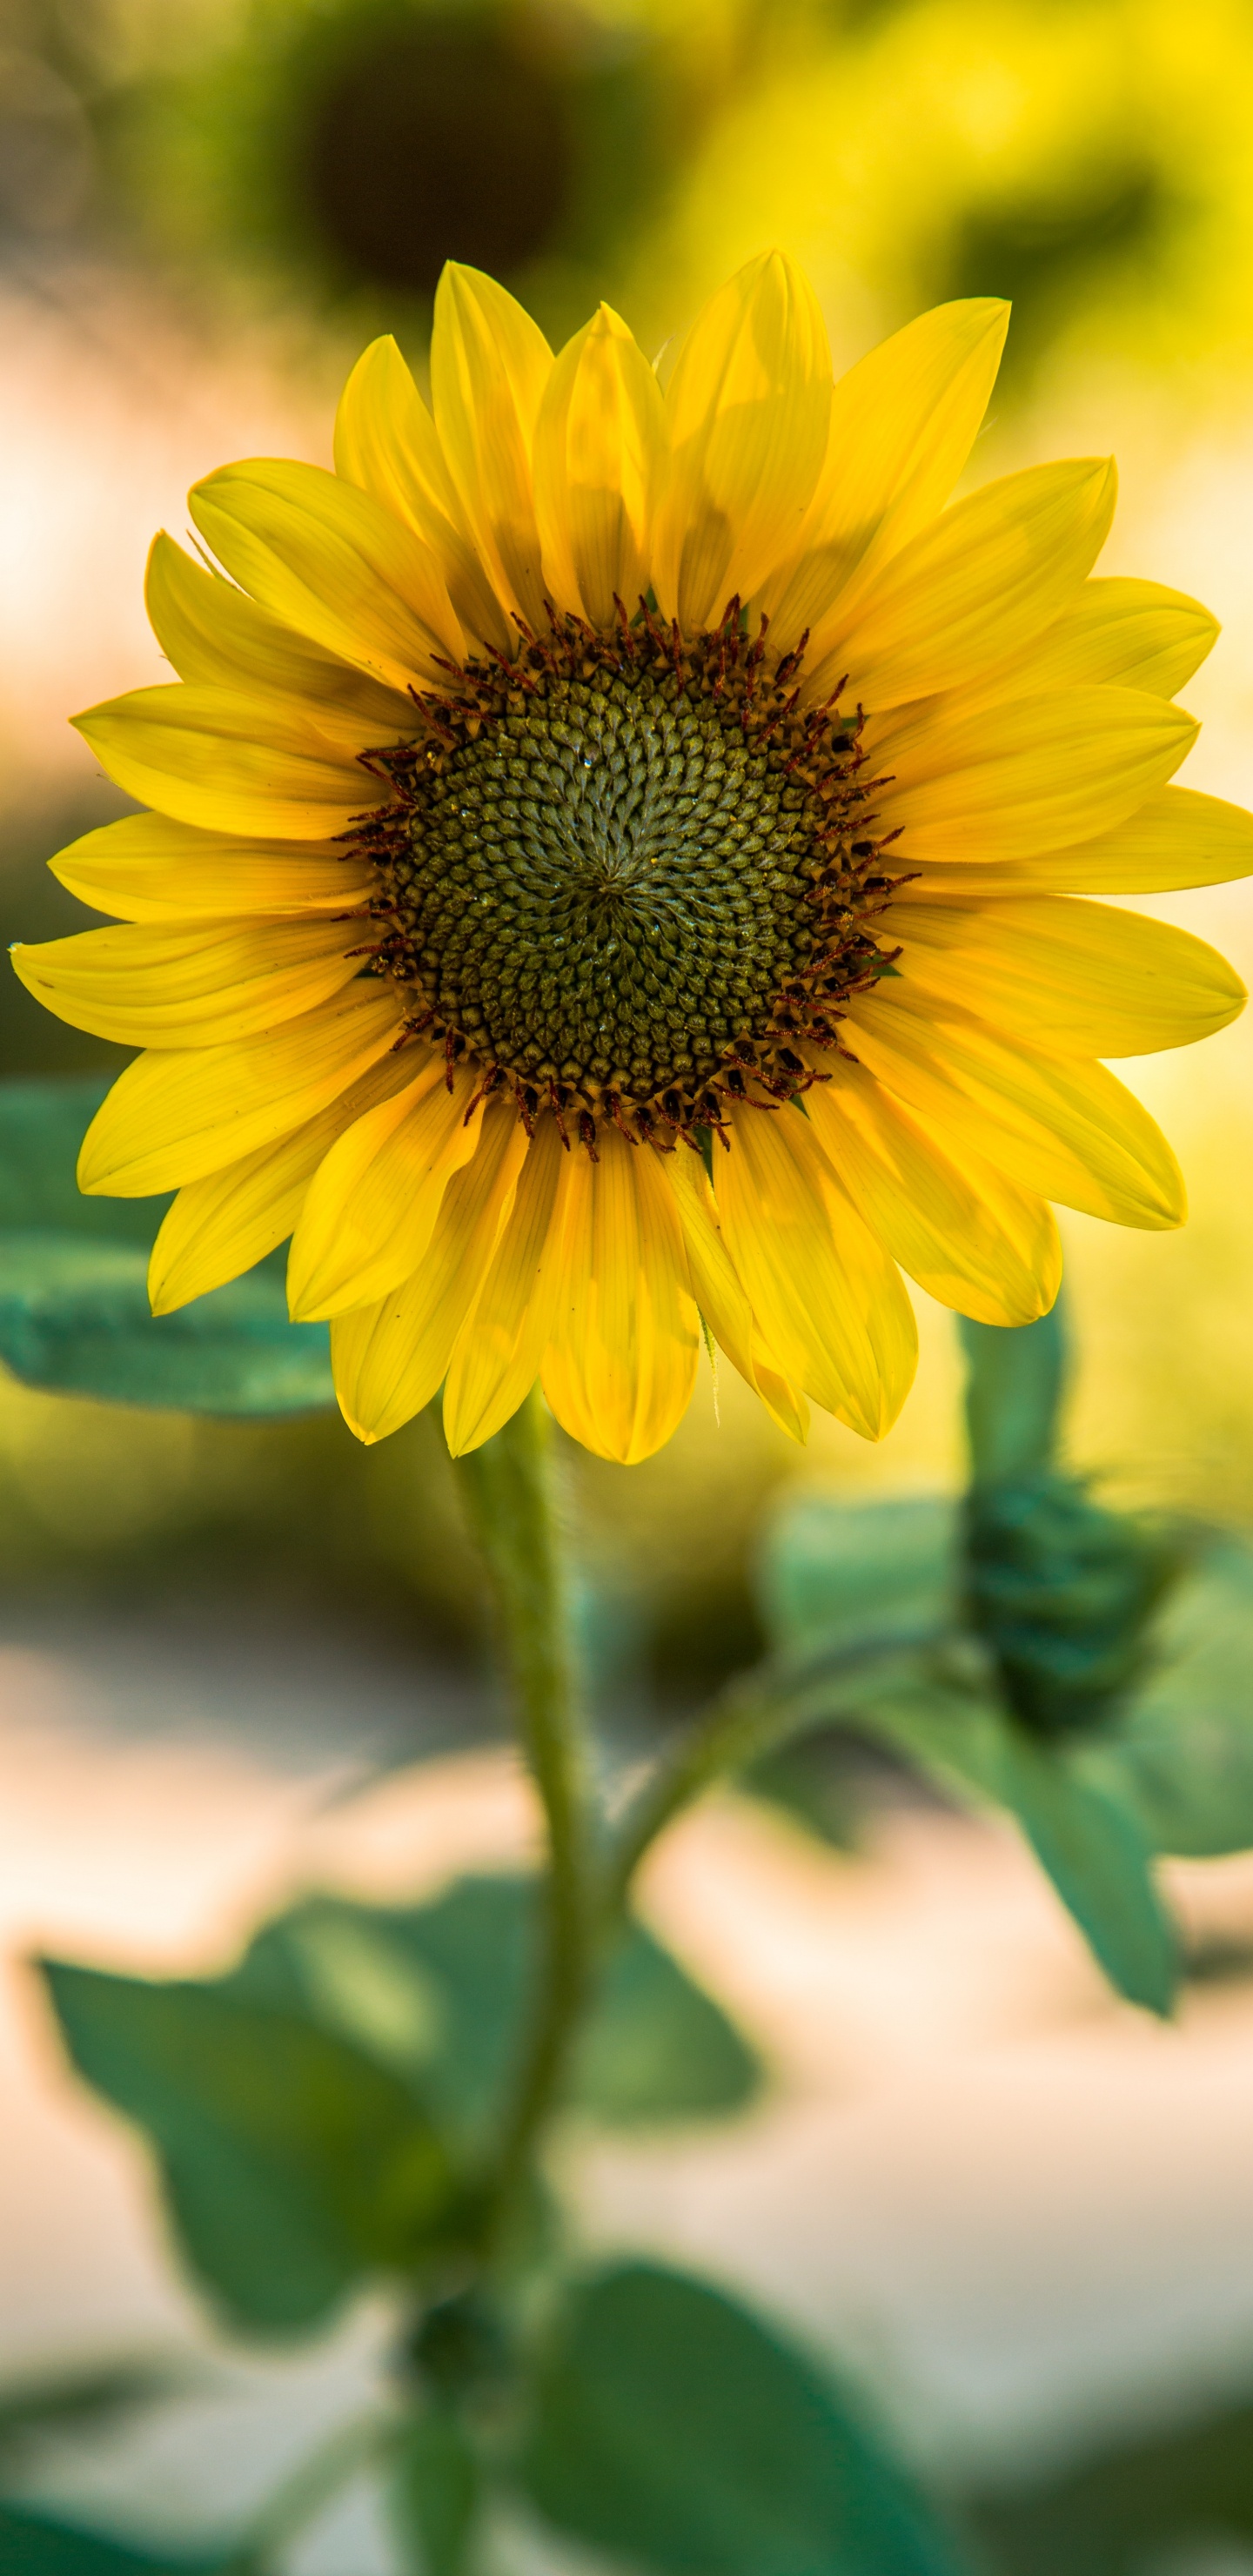 Yellow Sunflower in Close up Photography. Wallpaper in 1440x2960 Resolution